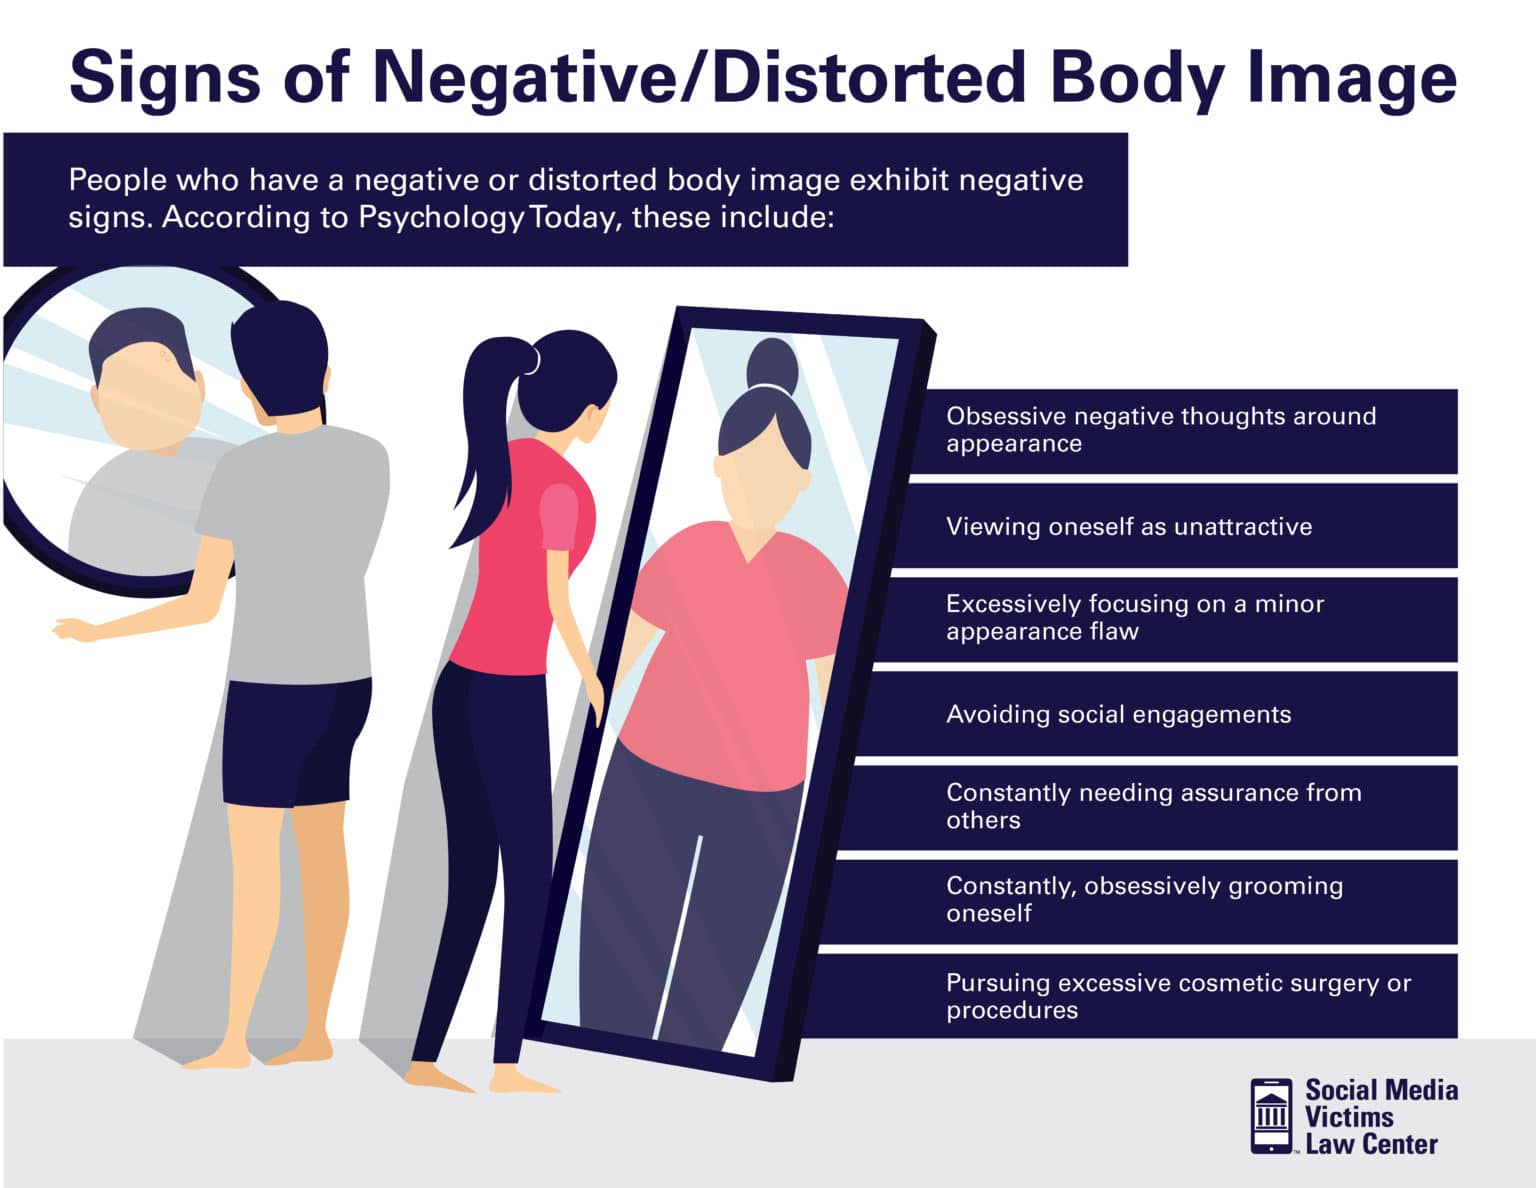 Signs of Negative/Distorted Body Image